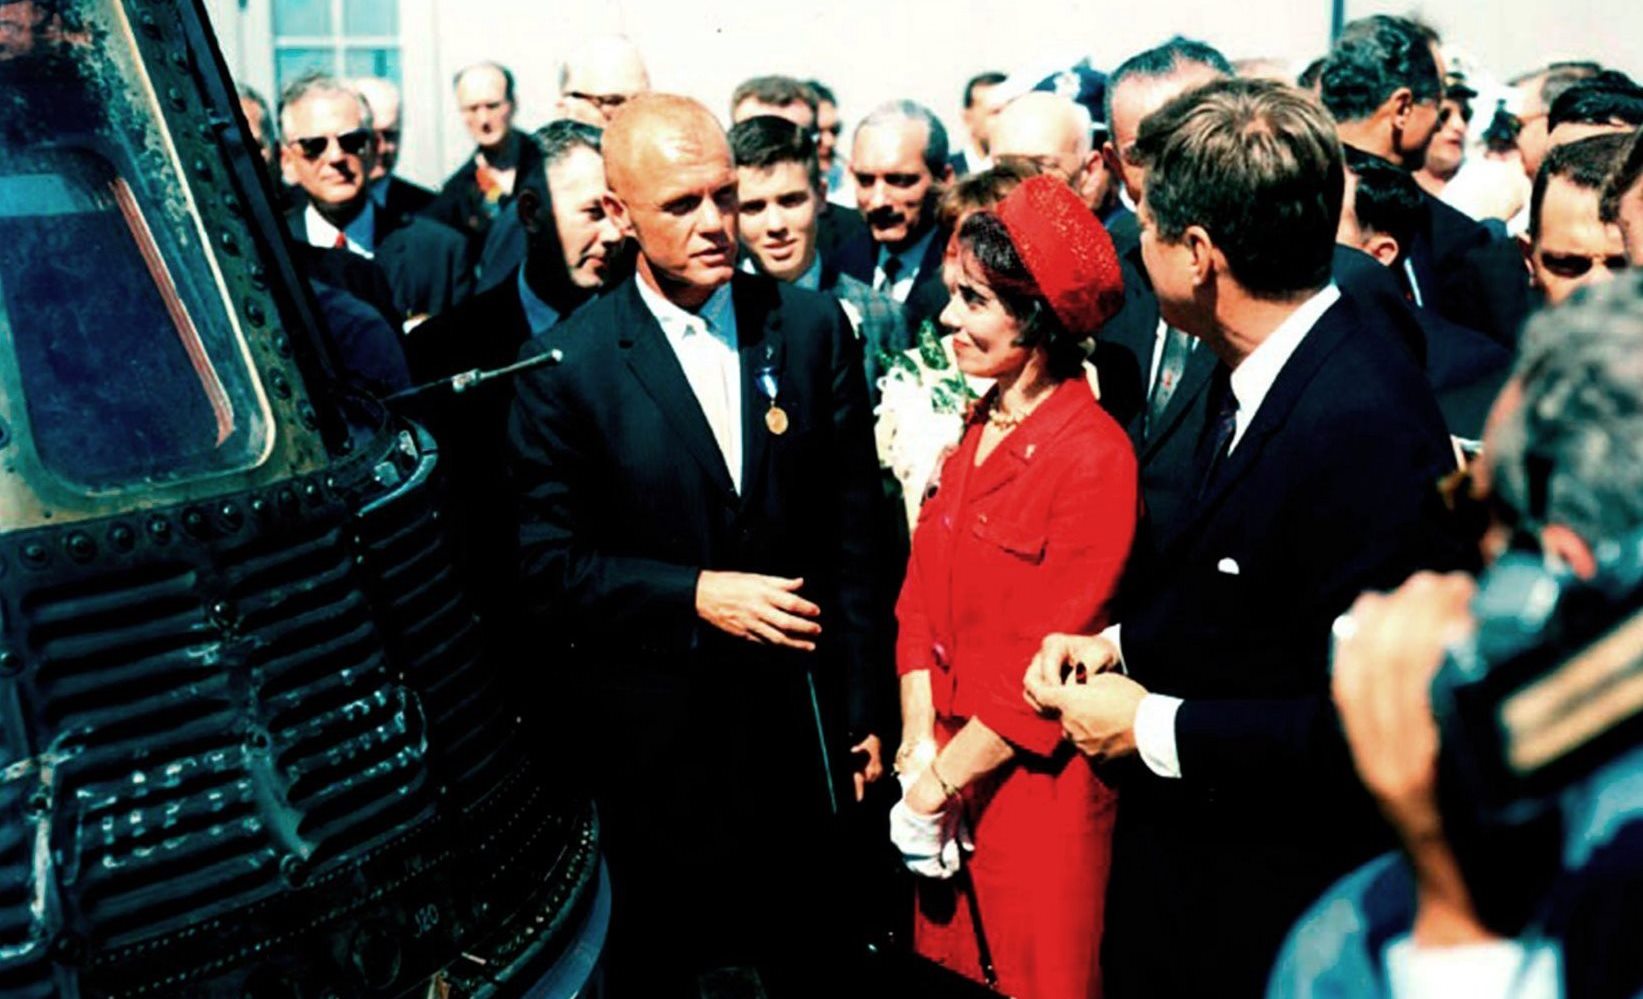 Astronaut John Glenn stands next to the Mercury Friendship 7 spacecraft as he talks to his wife, Annie and President John F. Kennedy. A large group of people surround them.